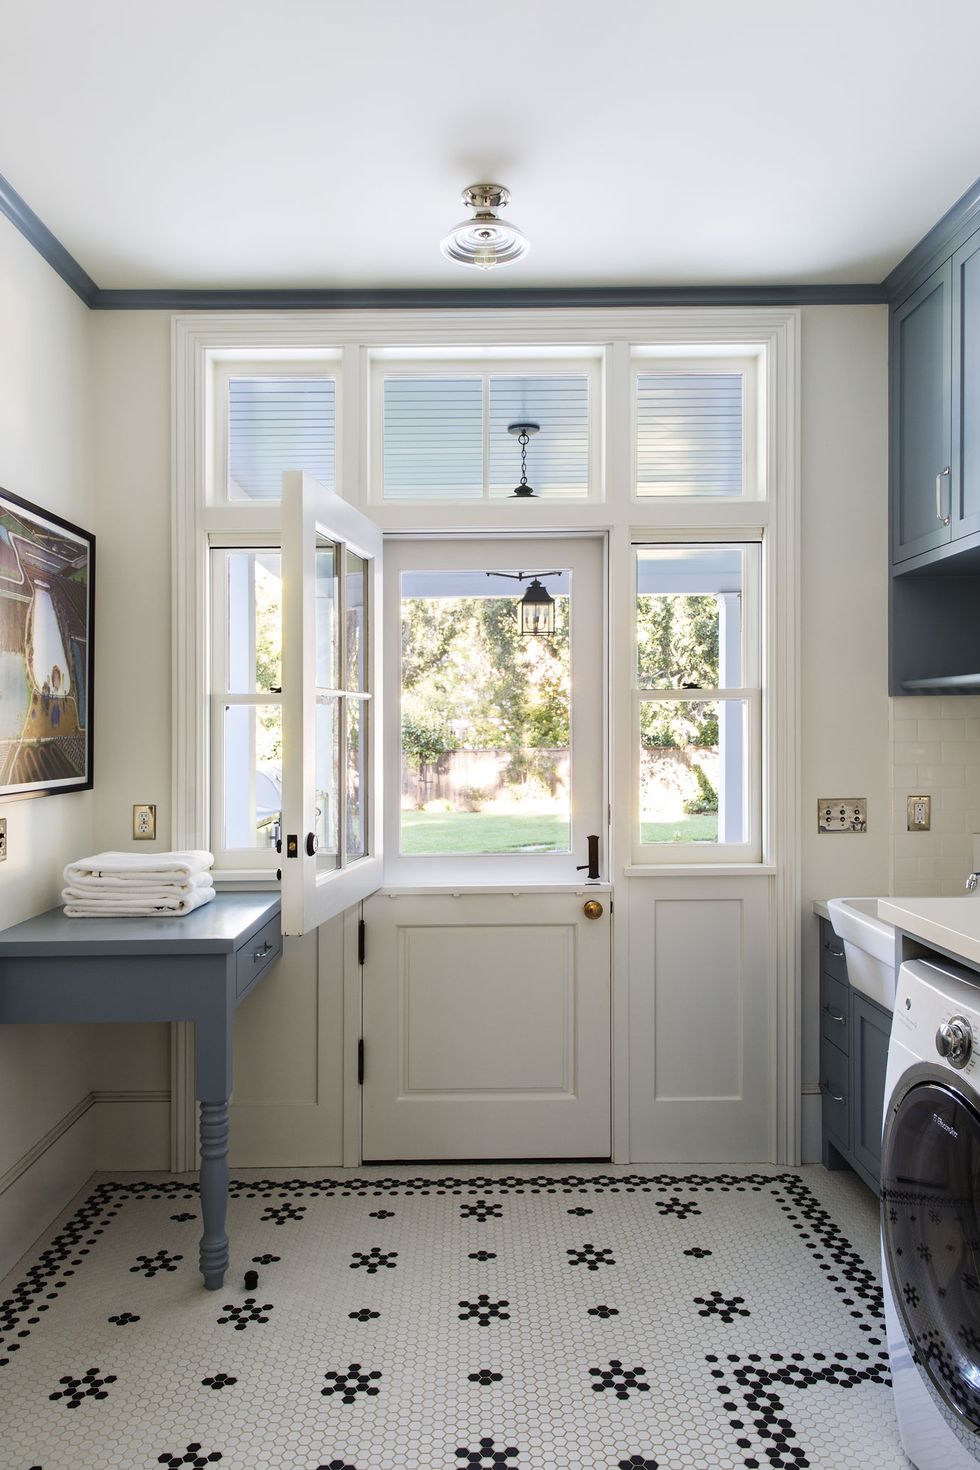 Enchanting may not be the first thing that comes to mind when you think laundry room, but Tim Barber's space in a Tennessee farmhouse defies that! Come enjoy Traditional Laundry Room and Mud Room Design Ideas, Resources, and Humor Quotes!